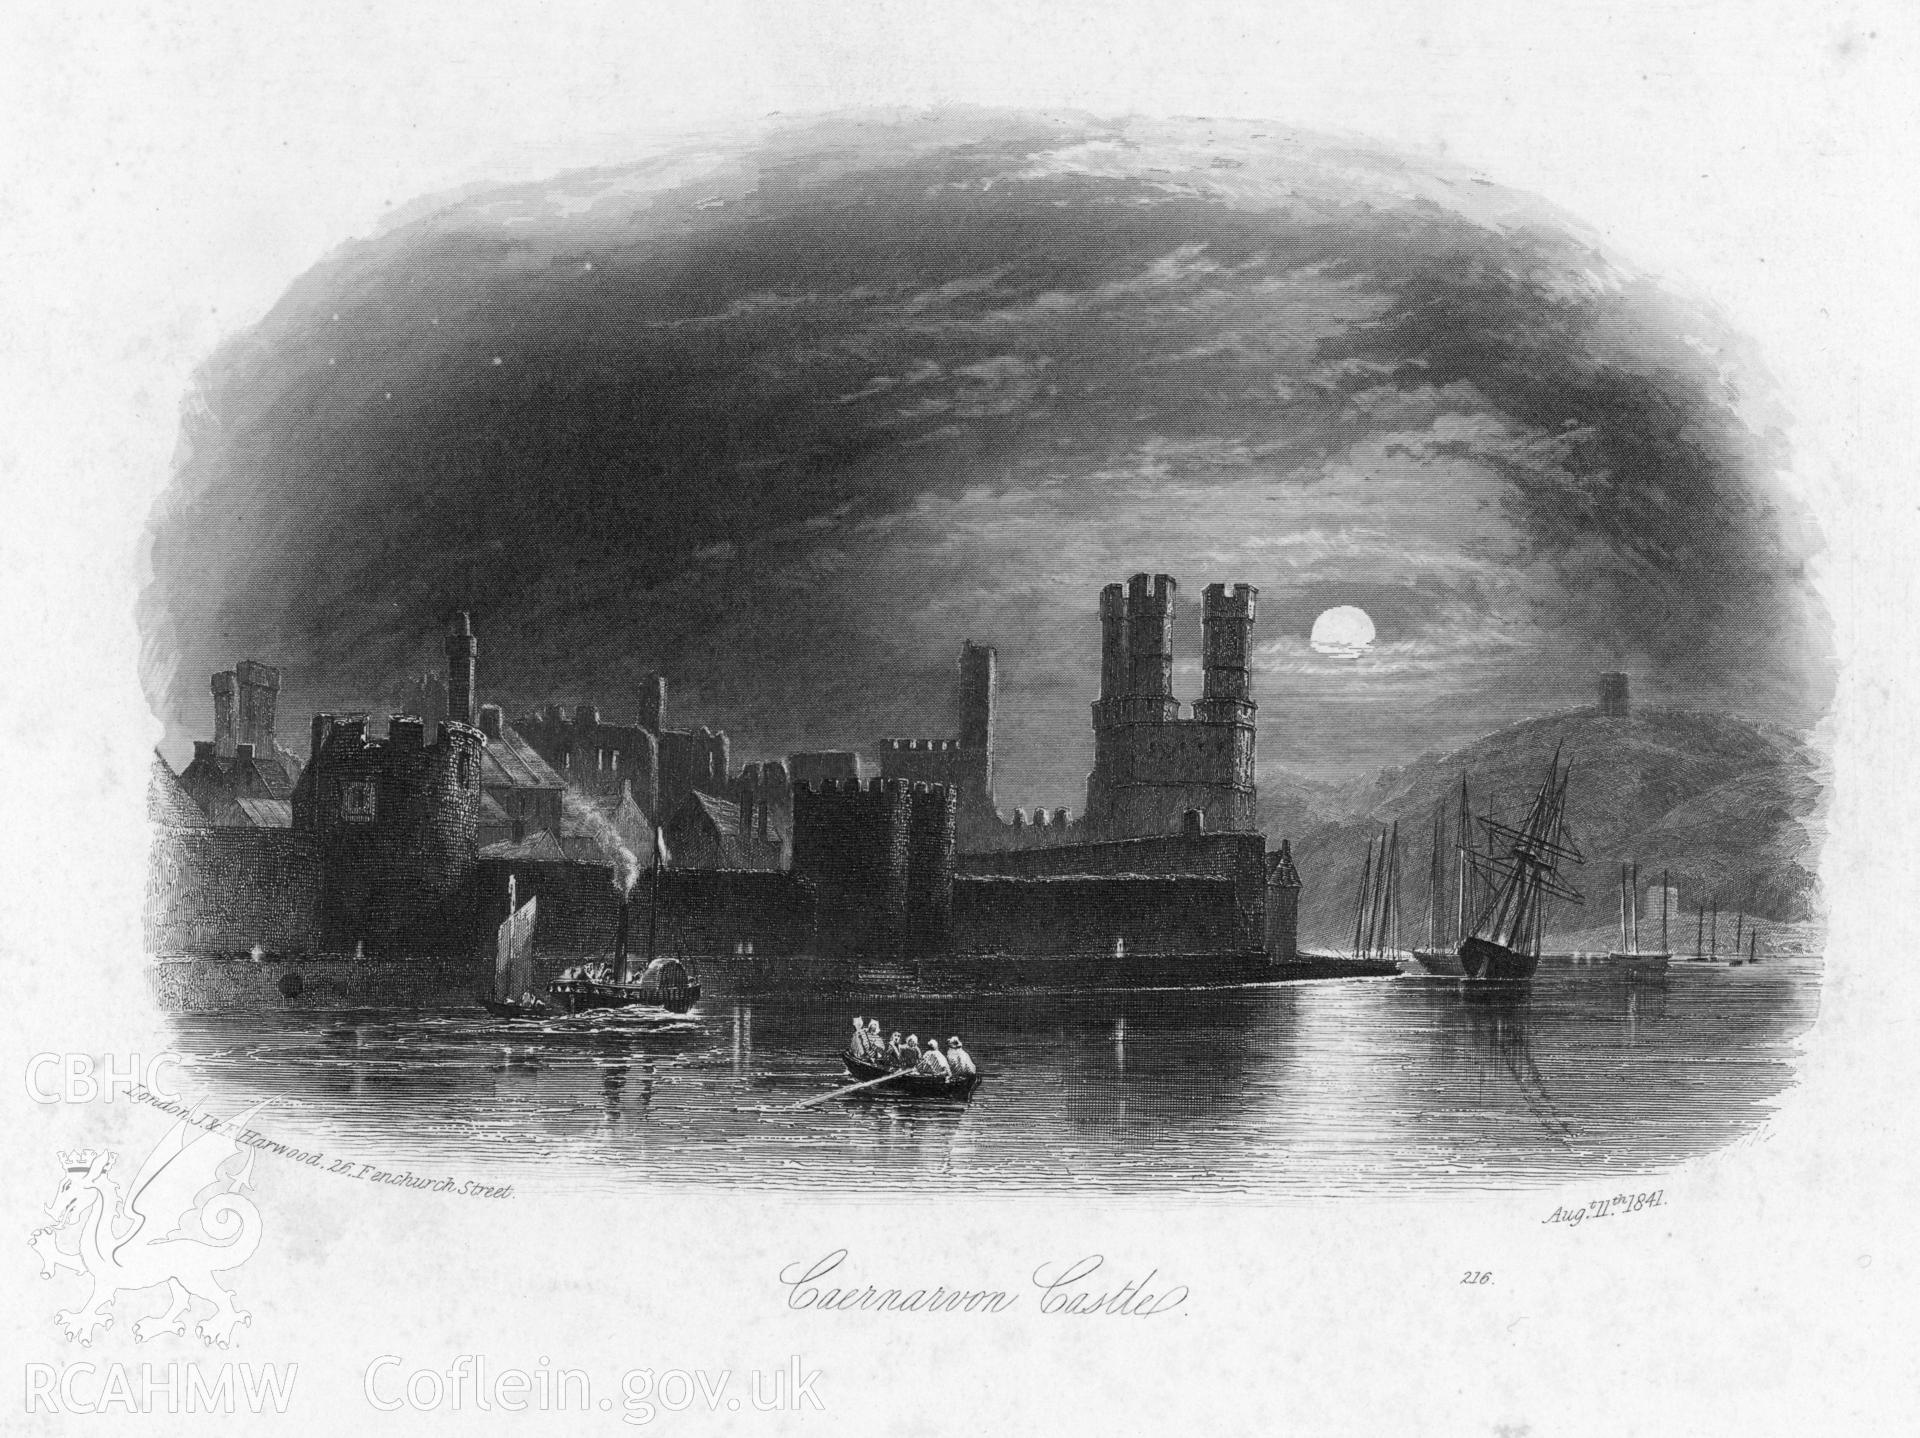 Caernarfon Castle; engraving showing the Eagle Tower at night, with ships and ferry in the foreground.